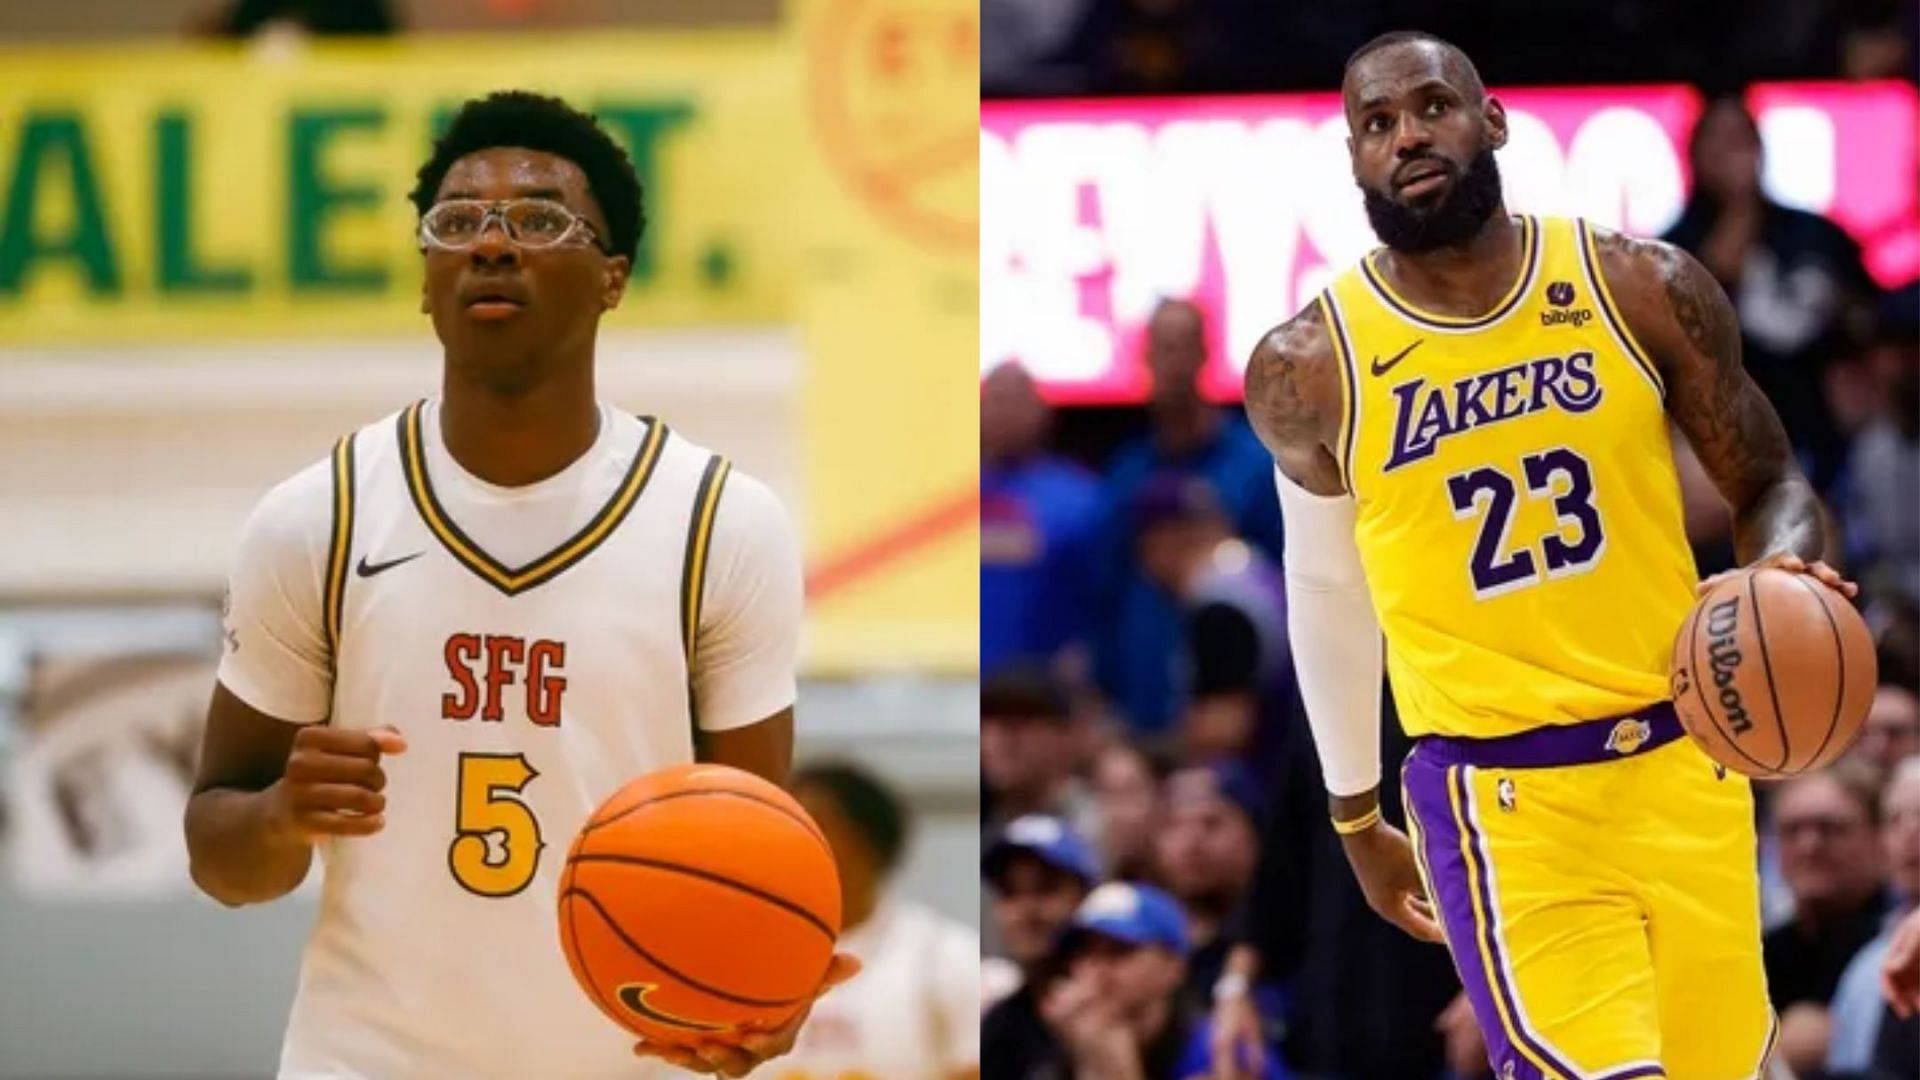 Bryce James (left) is eligible for the NBA Draft in 2026. His father LeBron (right) is still playing in the NBA at a higher level with the Los Angeles Lakers. (Image Source: IMAGN)